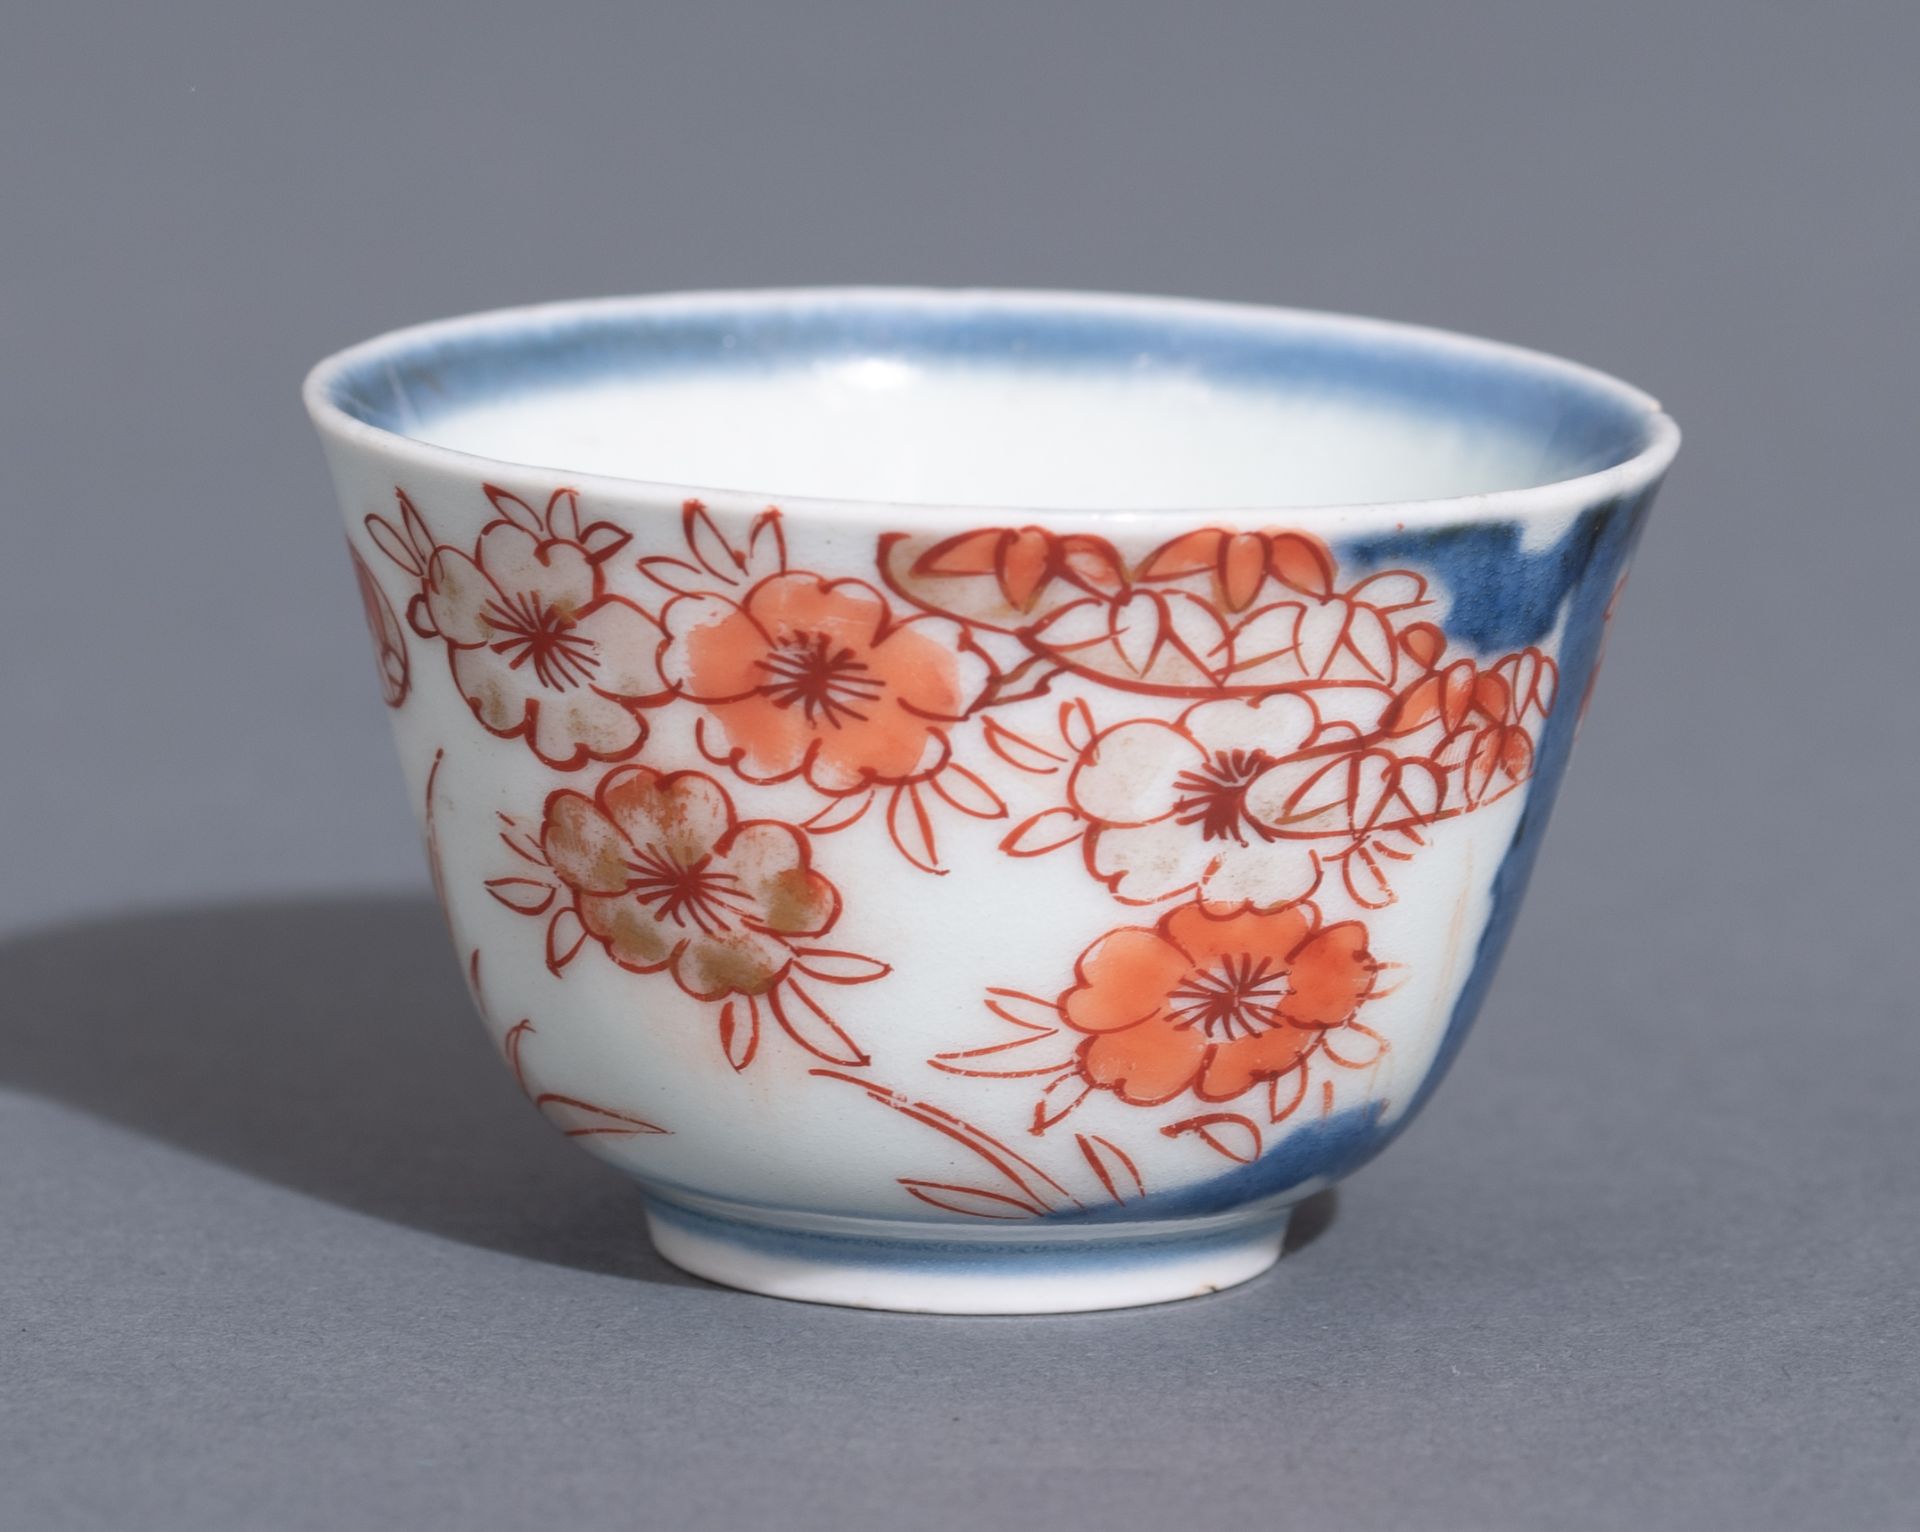 A collection of Chinese and Japanese porcelain items, 18th / 19th / 20thC, H 4 - 47 - ø 10,5 - 23 cm - Image 16 of 19